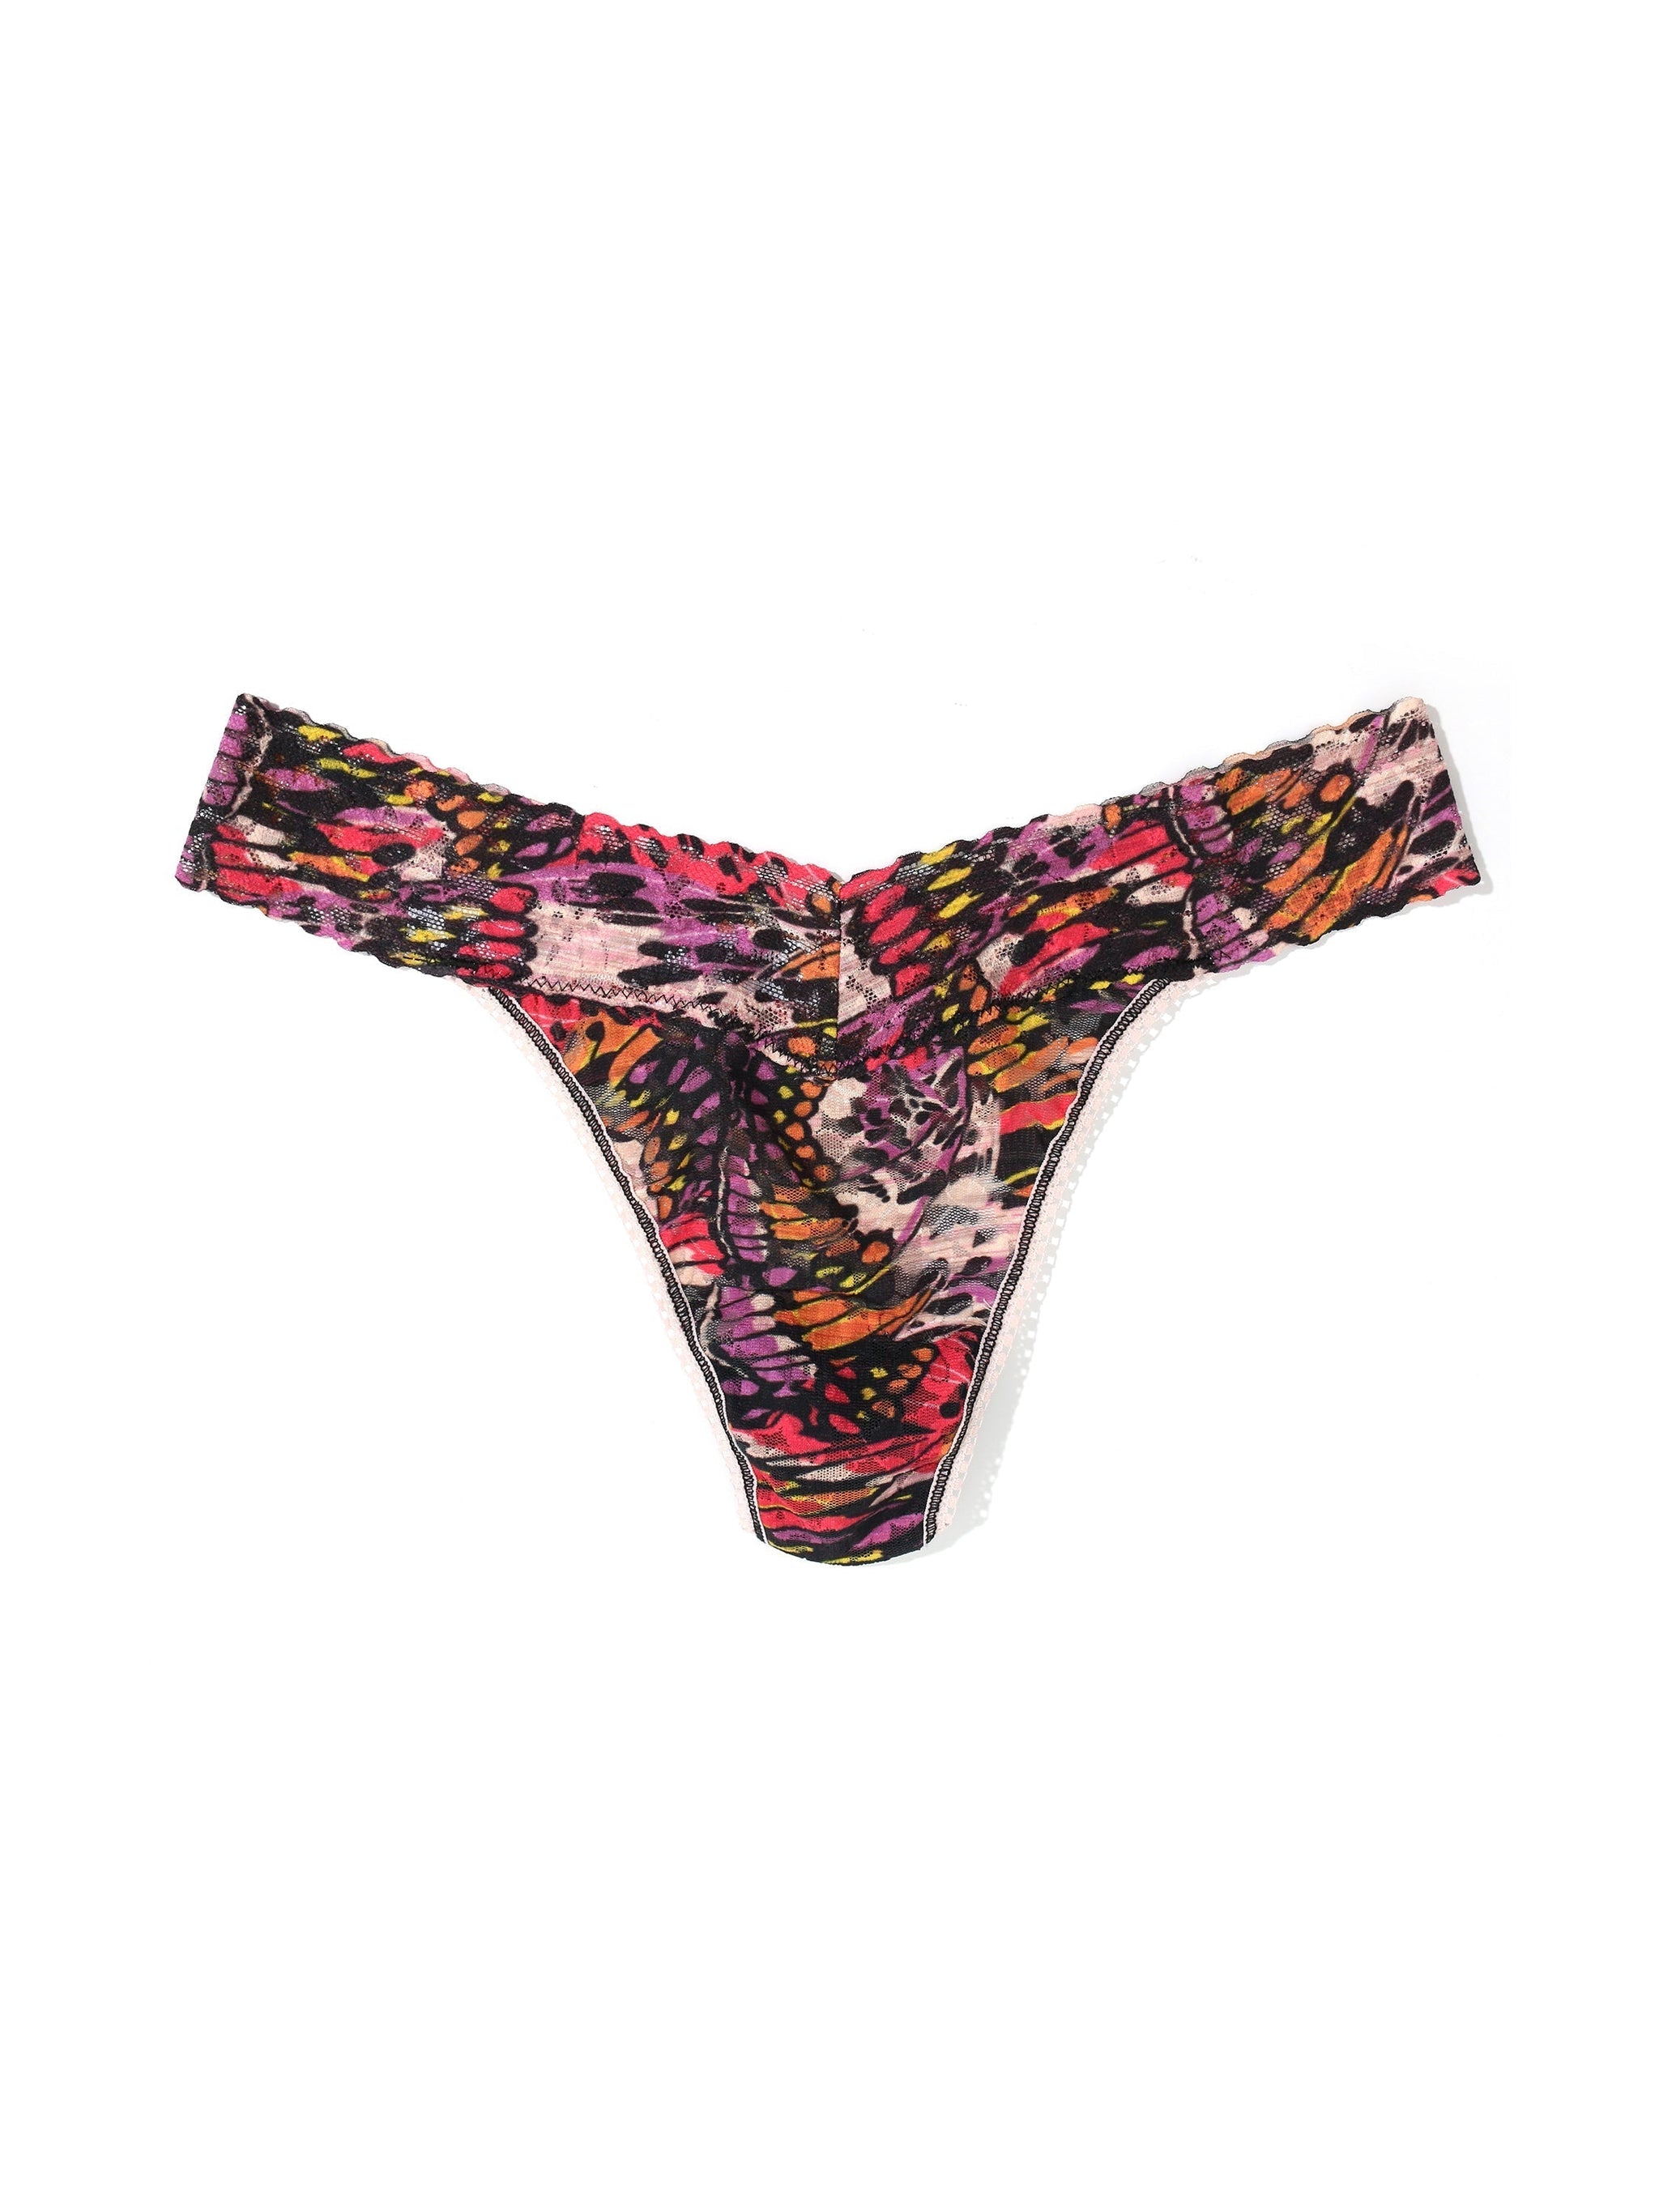 Printed Daily Lace™ Original Rise Thong Warm Breeze